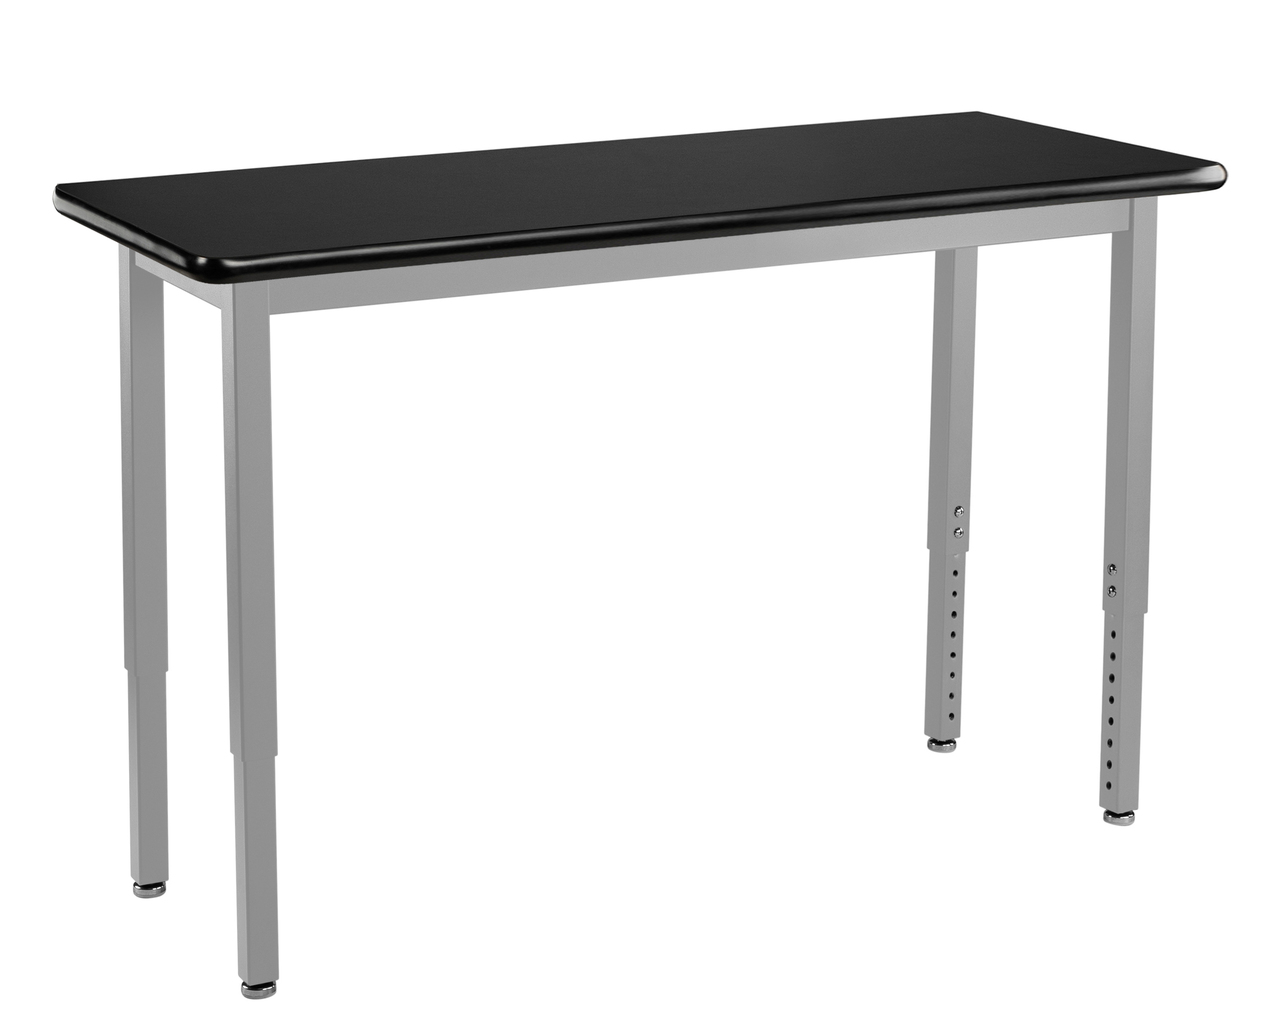 NPS Steel Science Lab Table, 18" x 48", HPL Top - Black Surface Color